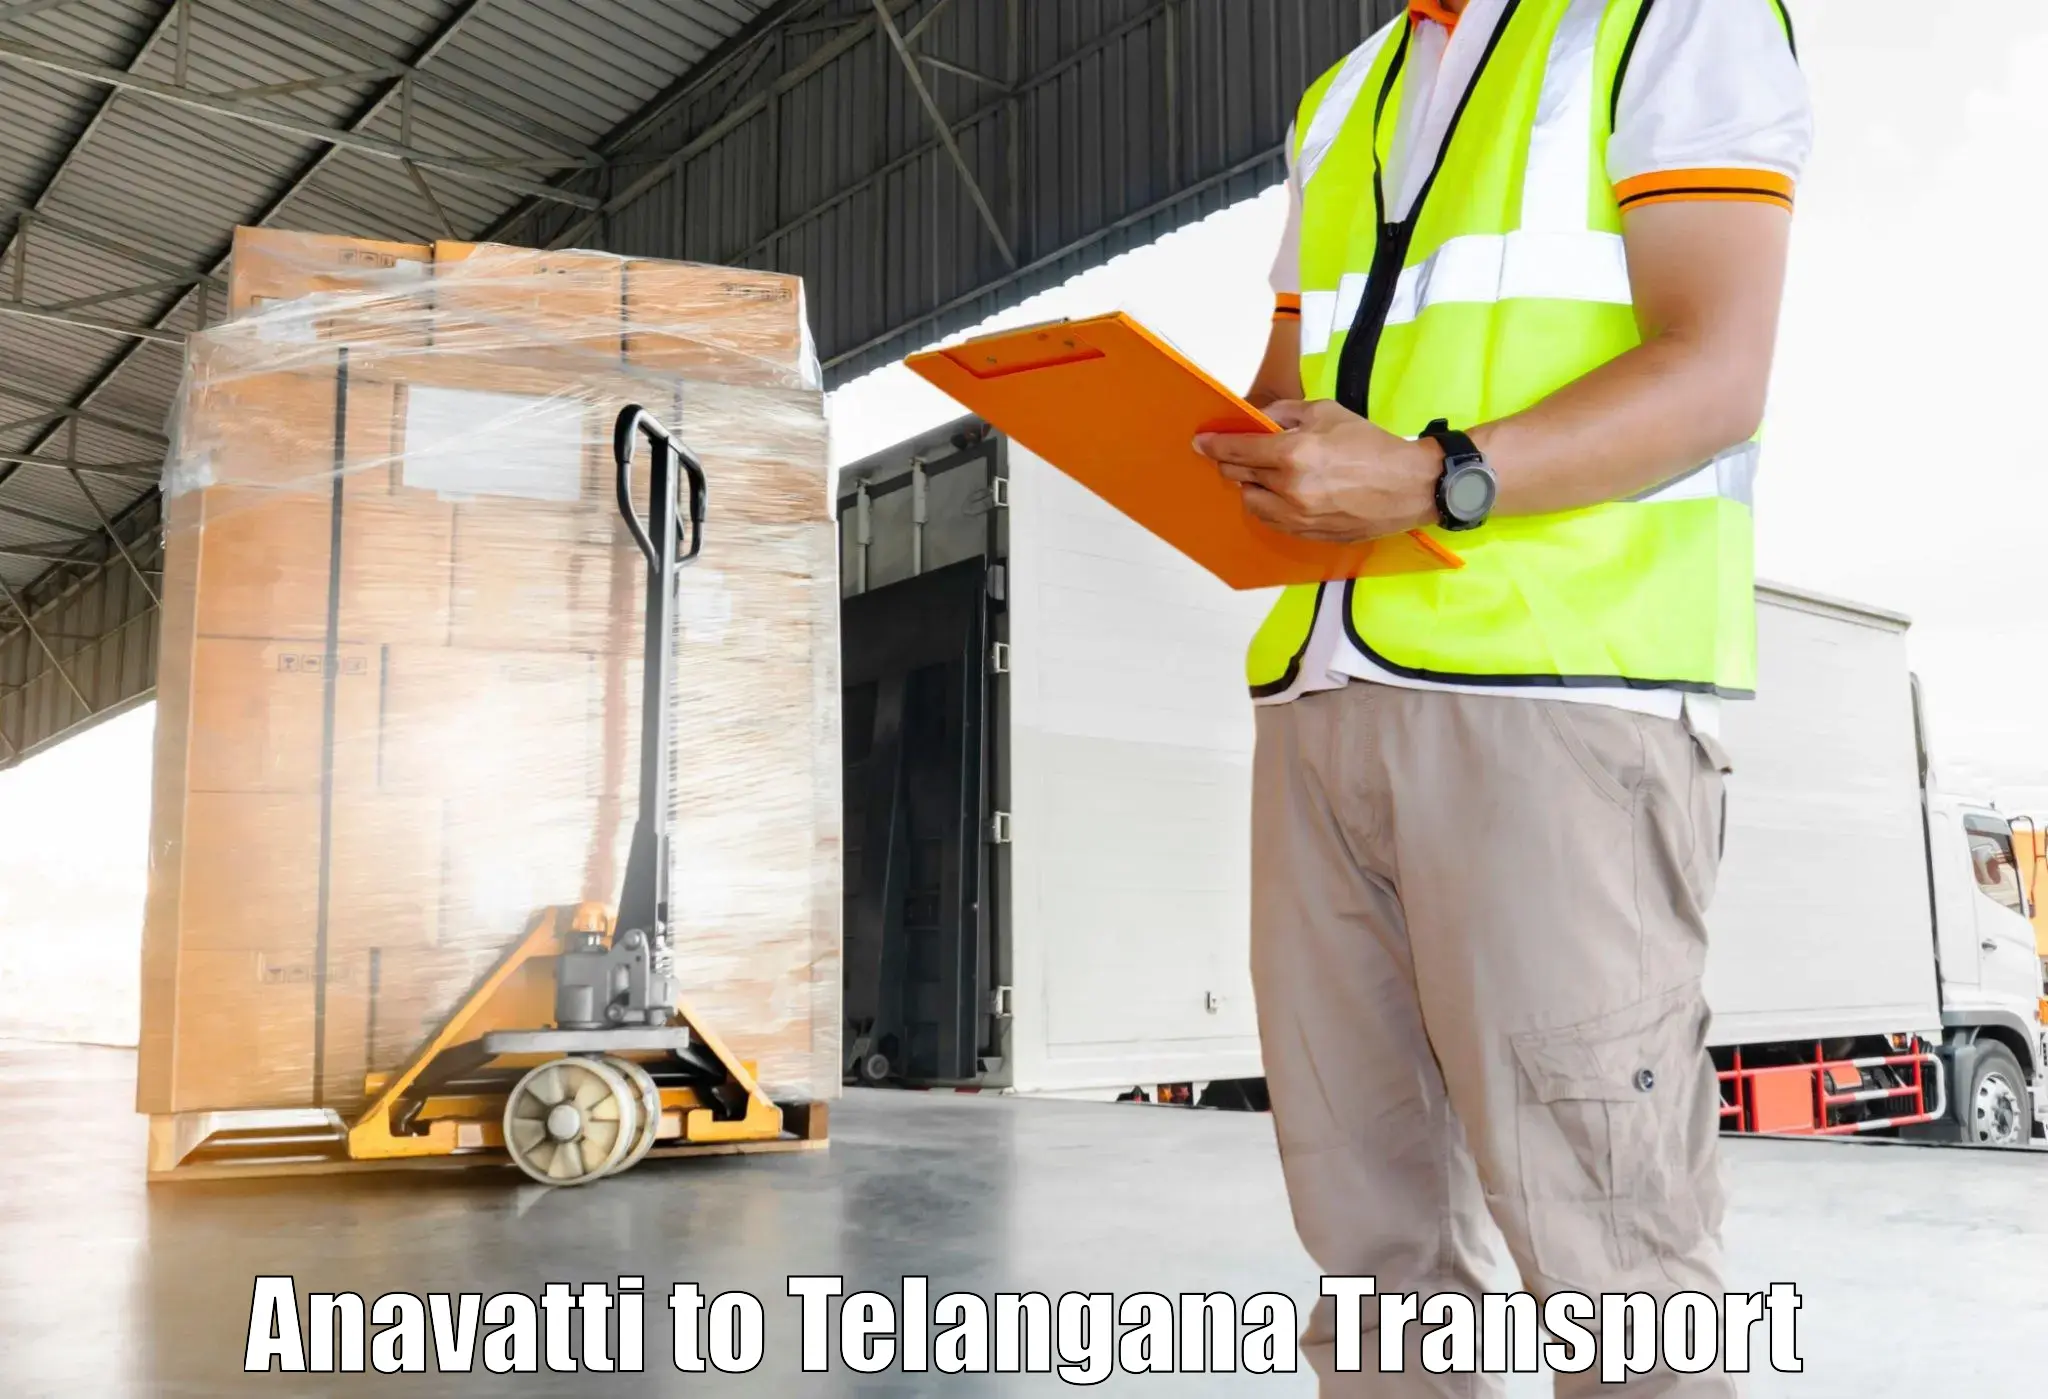 Shipping services in Anavatti to Parkal